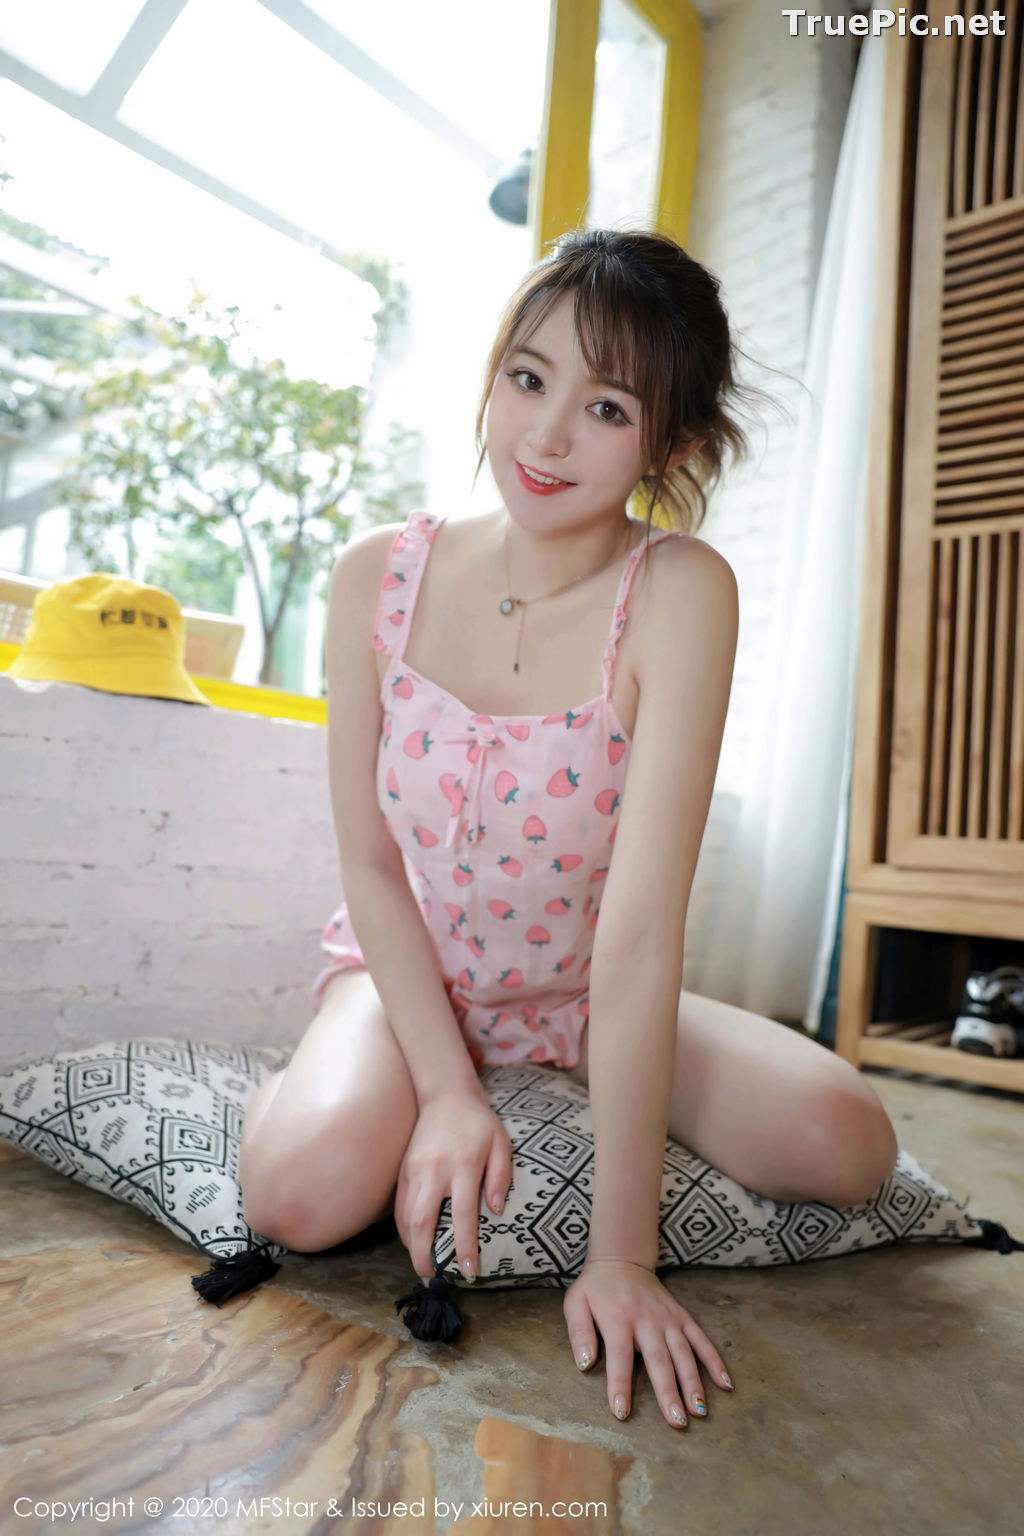 Image MFStar Vol.349 - Chinese Model Yoo优优 - Sexy and Cute Strawberry Girl - TruePic.net - Picture-24